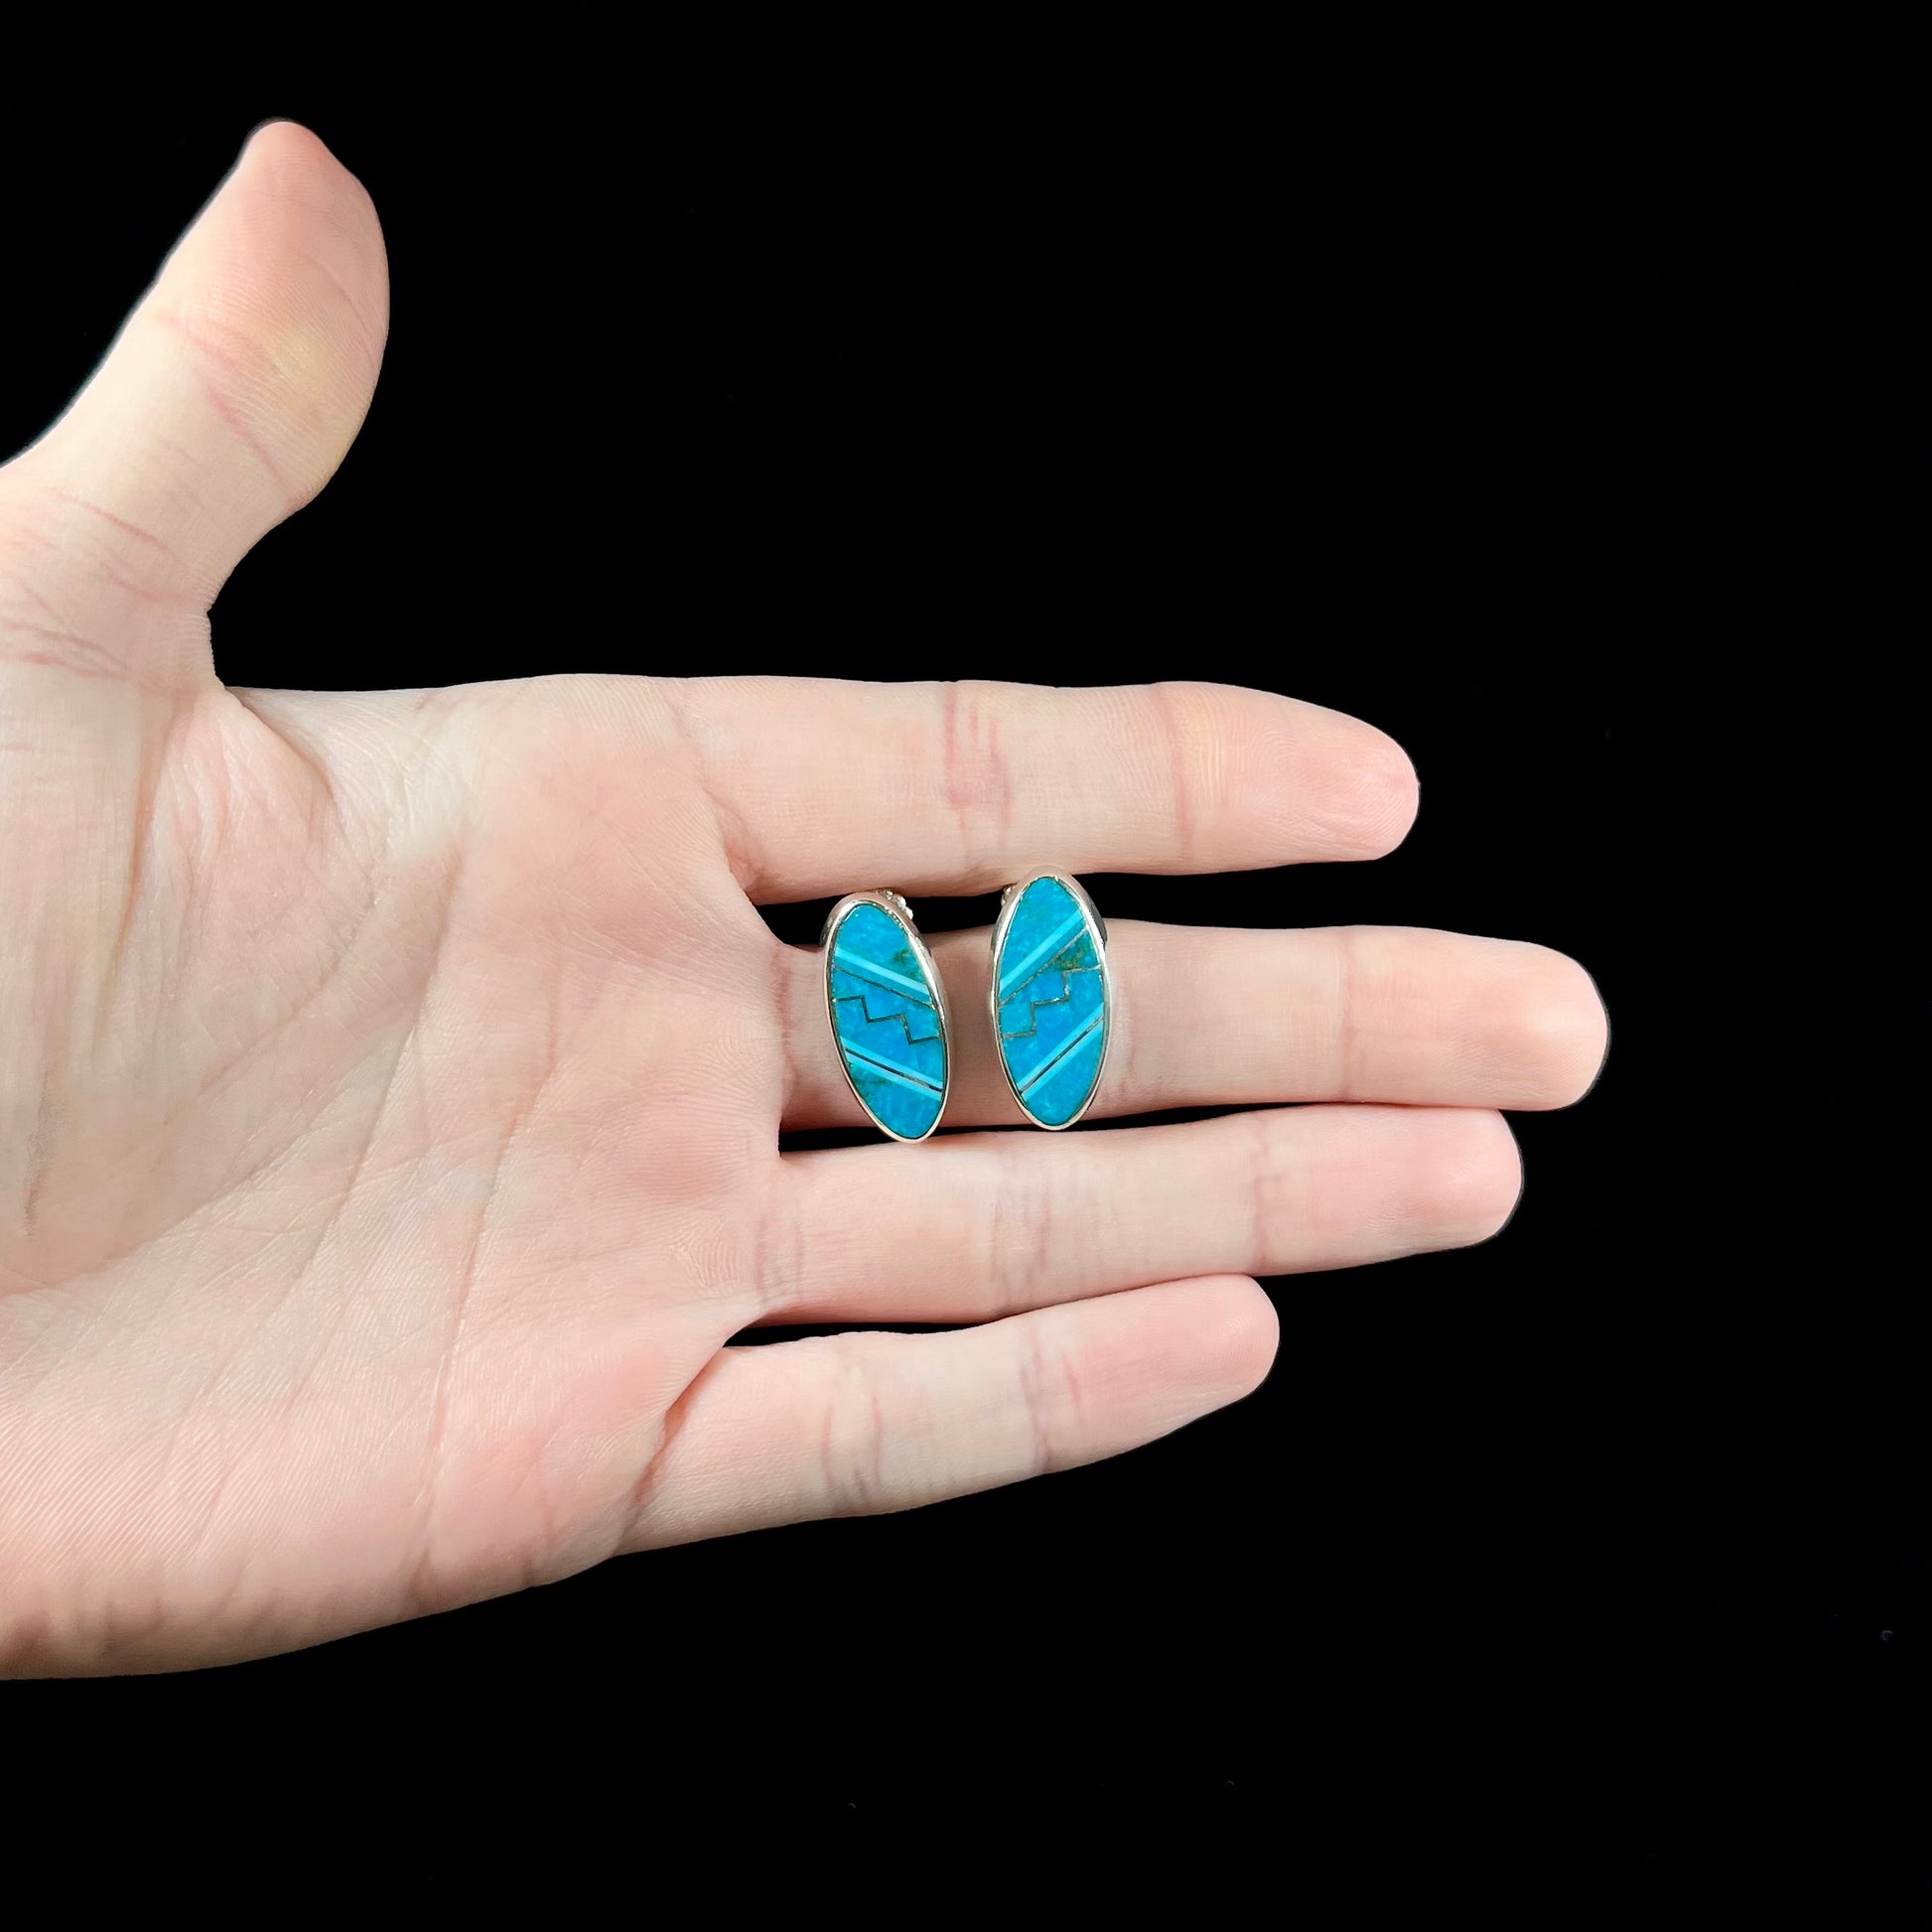 A pair of sterling silver turquoise inlay earrings, handmade by the Zuni artist.